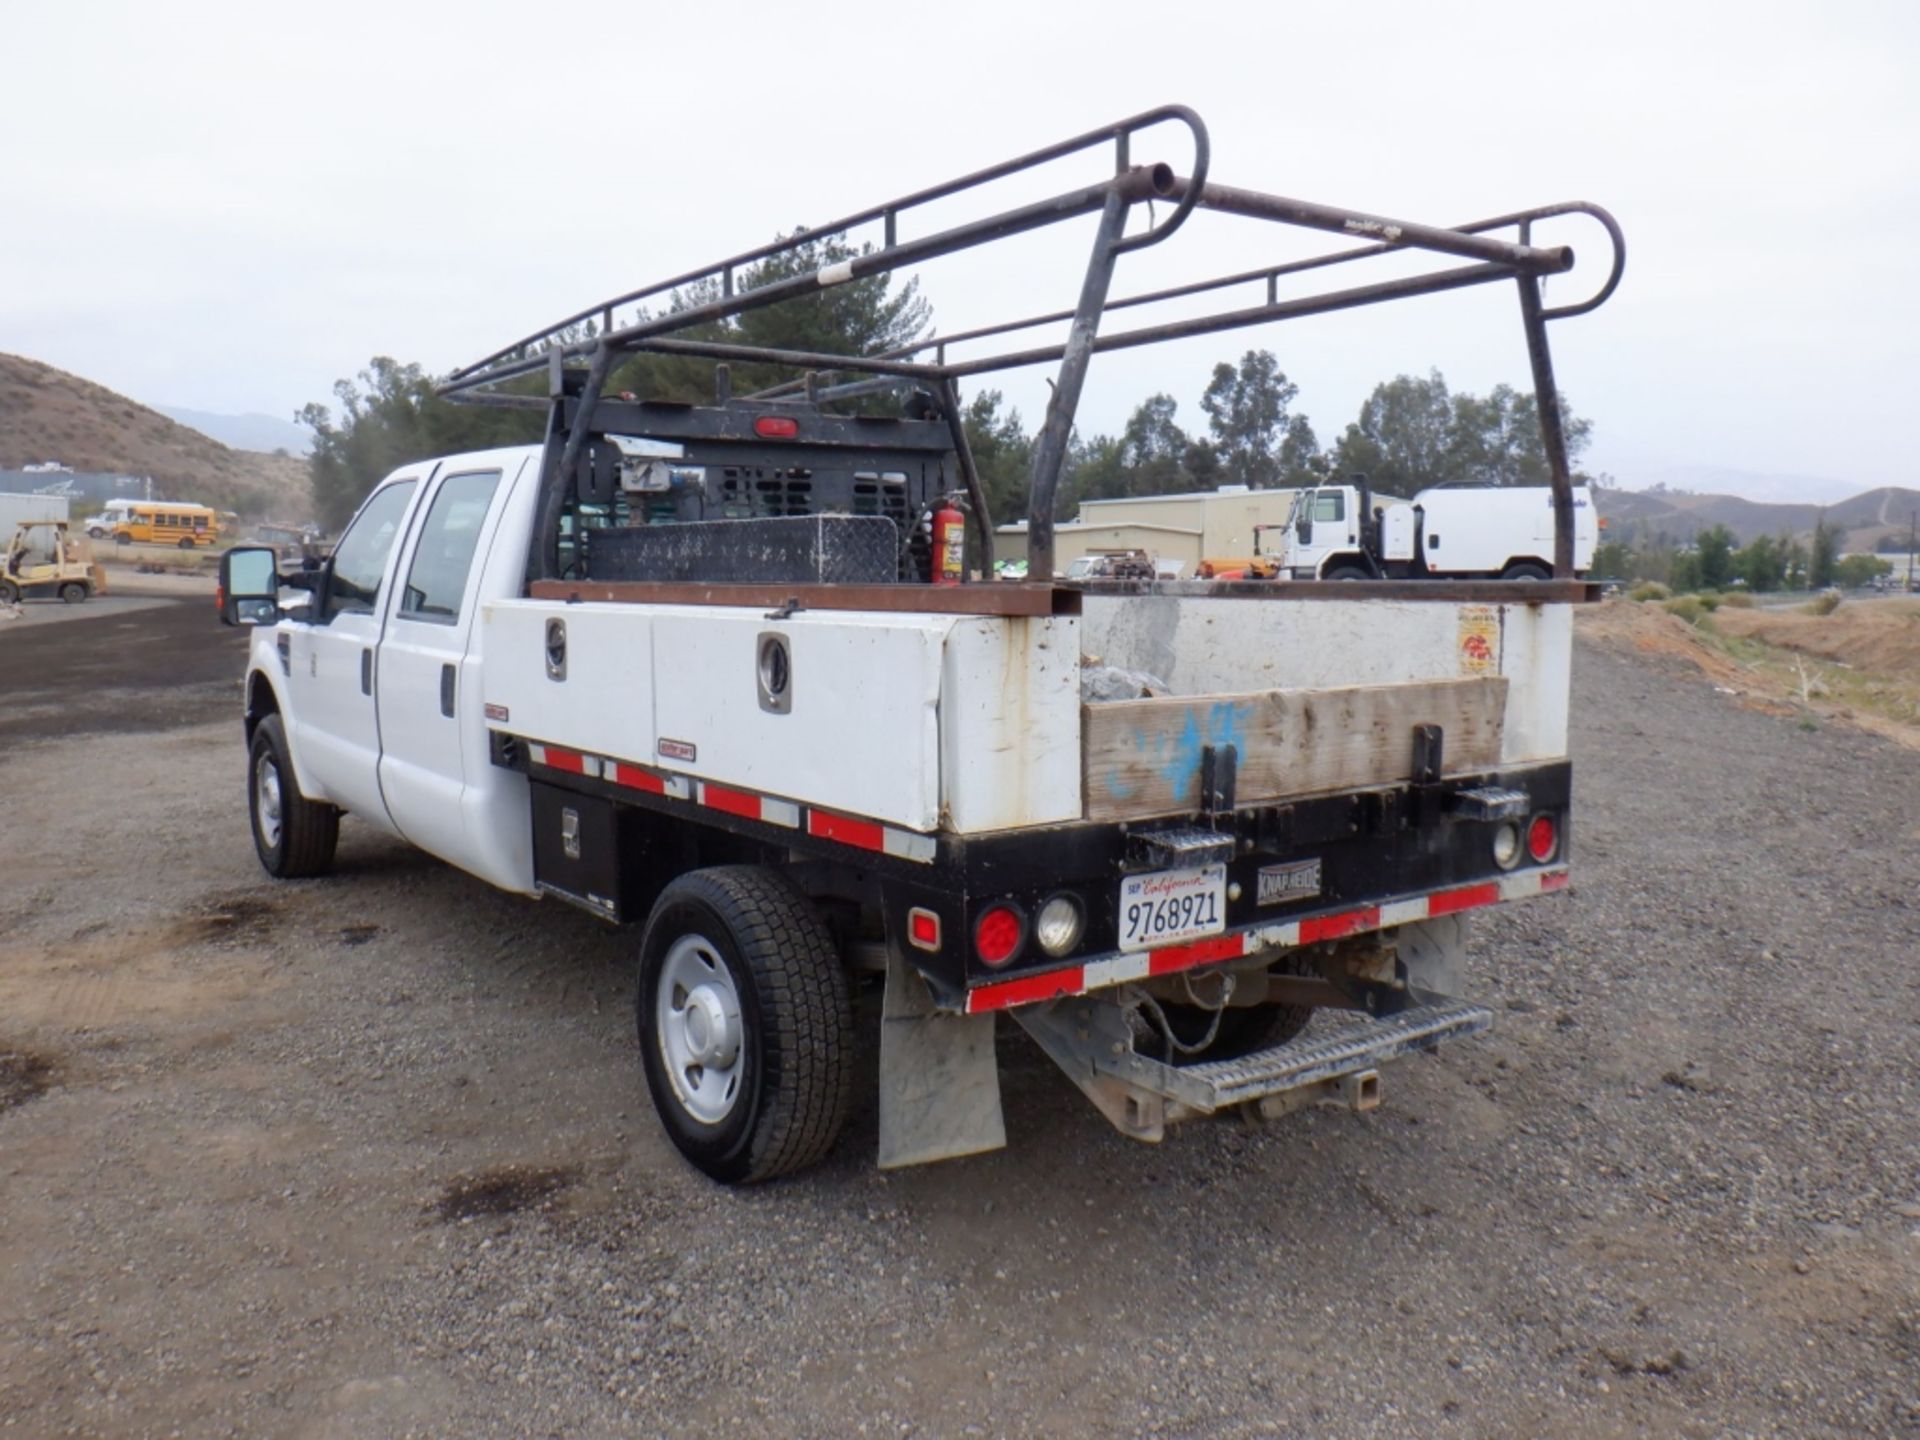 2010 Ford F250 Crew Cab Flatbed Truck, - Image 4 of 24